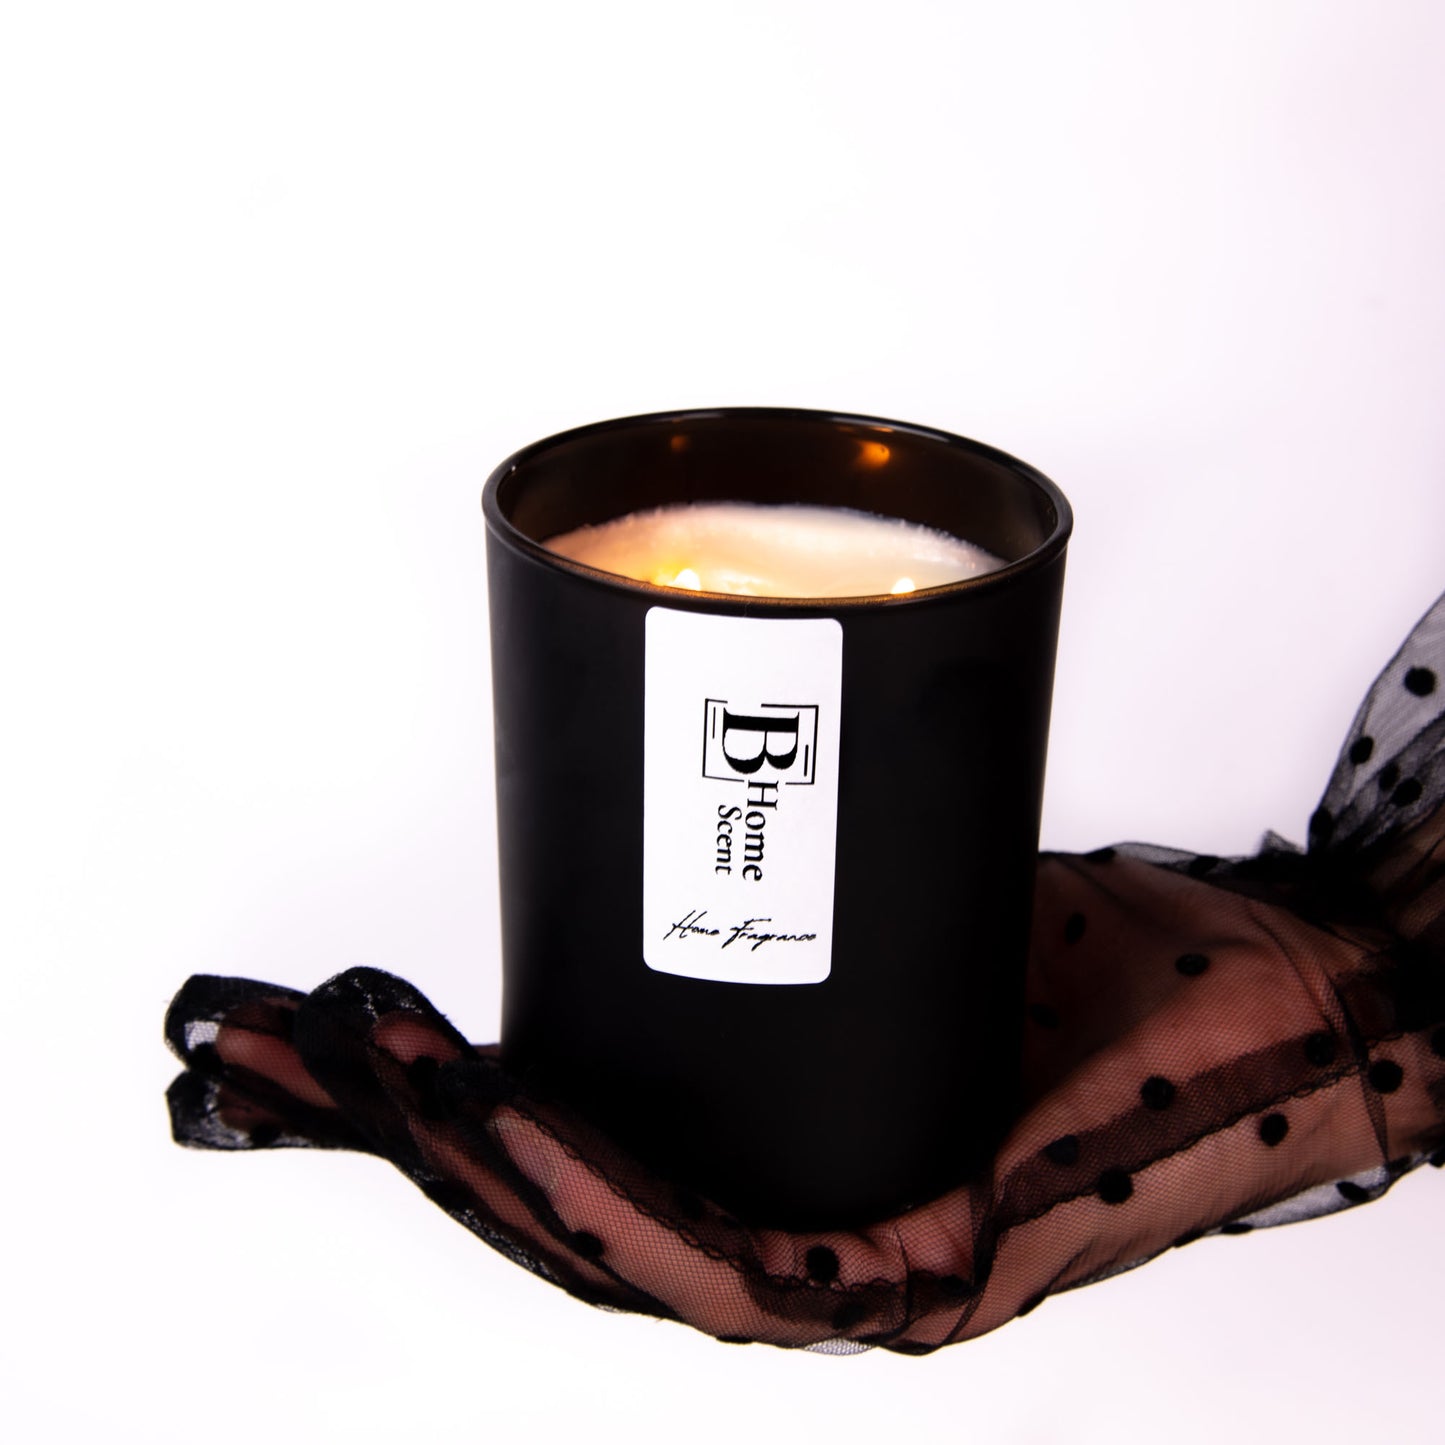 Spring Awake Scented Candle